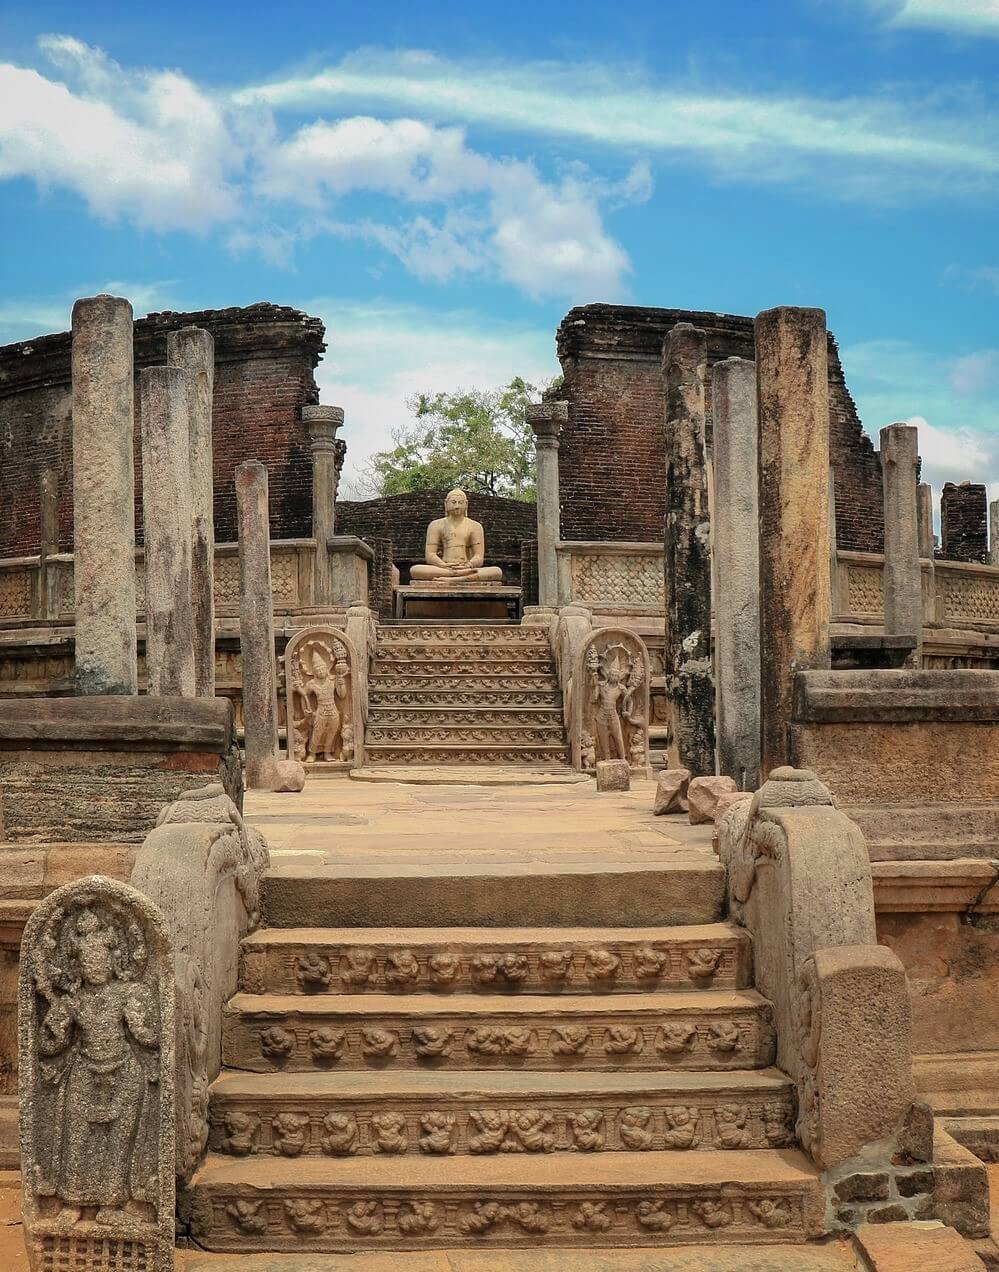 Polonnaruwa, in Sri Lanka is an ancient city which originates as far back at the 4th Century